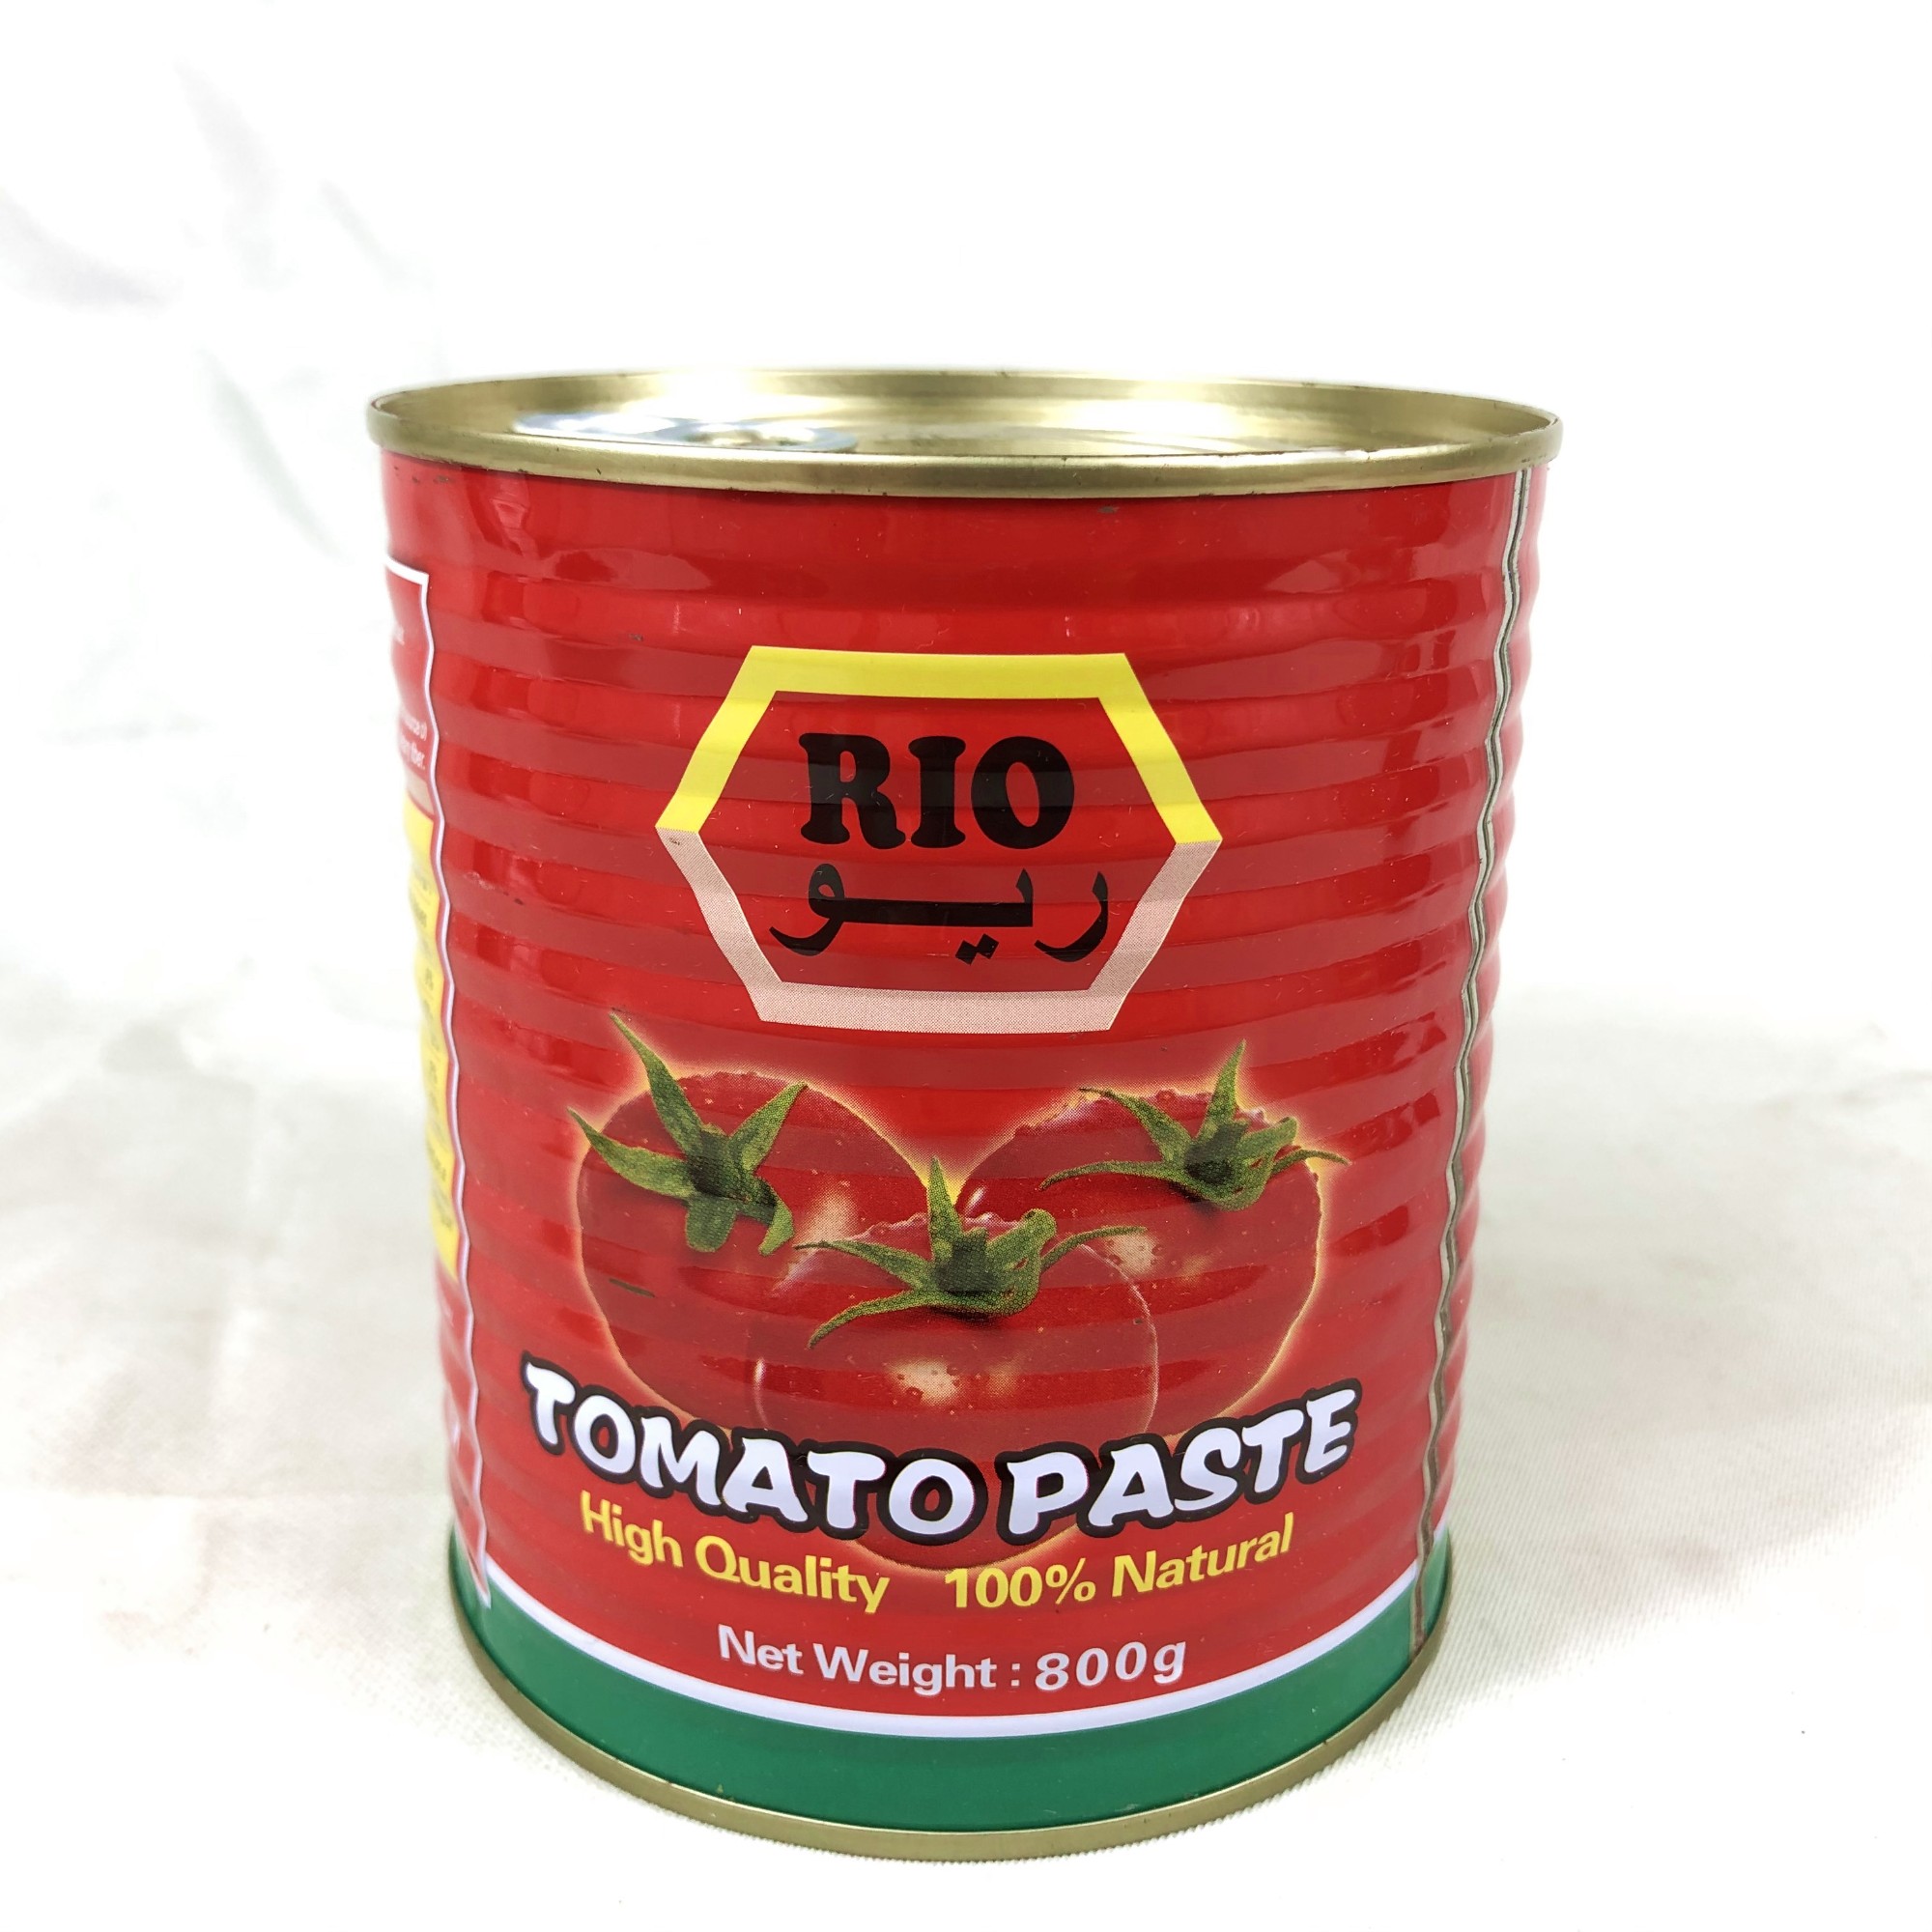 Canned tomato paste 800g